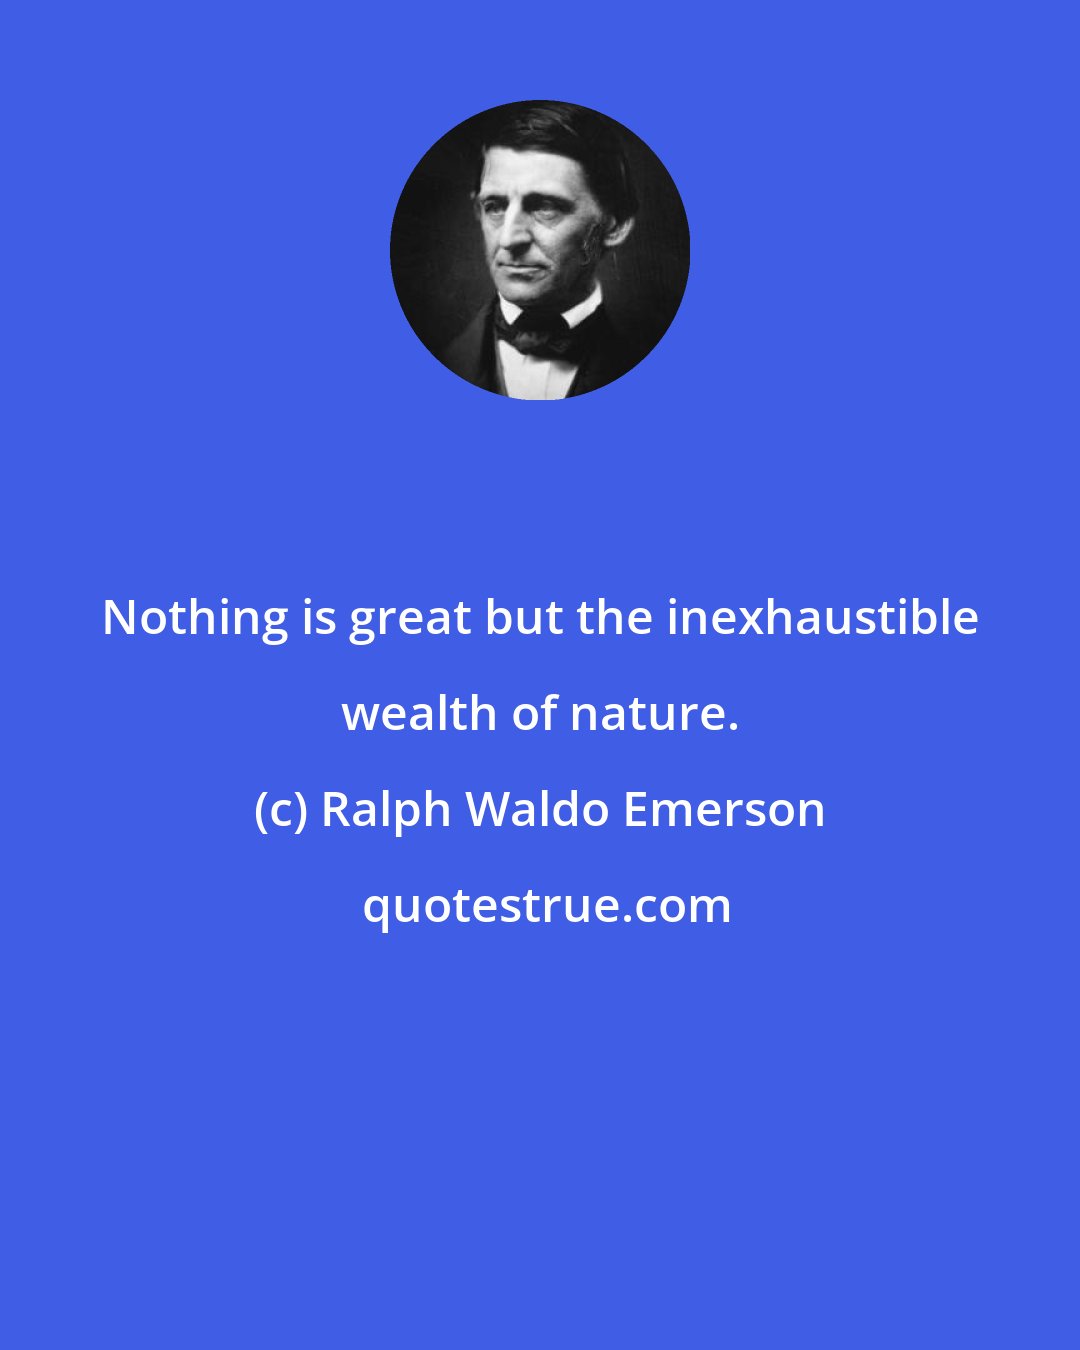 Ralph Waldo Emerson: Nothing is great but the inexhaustible wealth of nature.